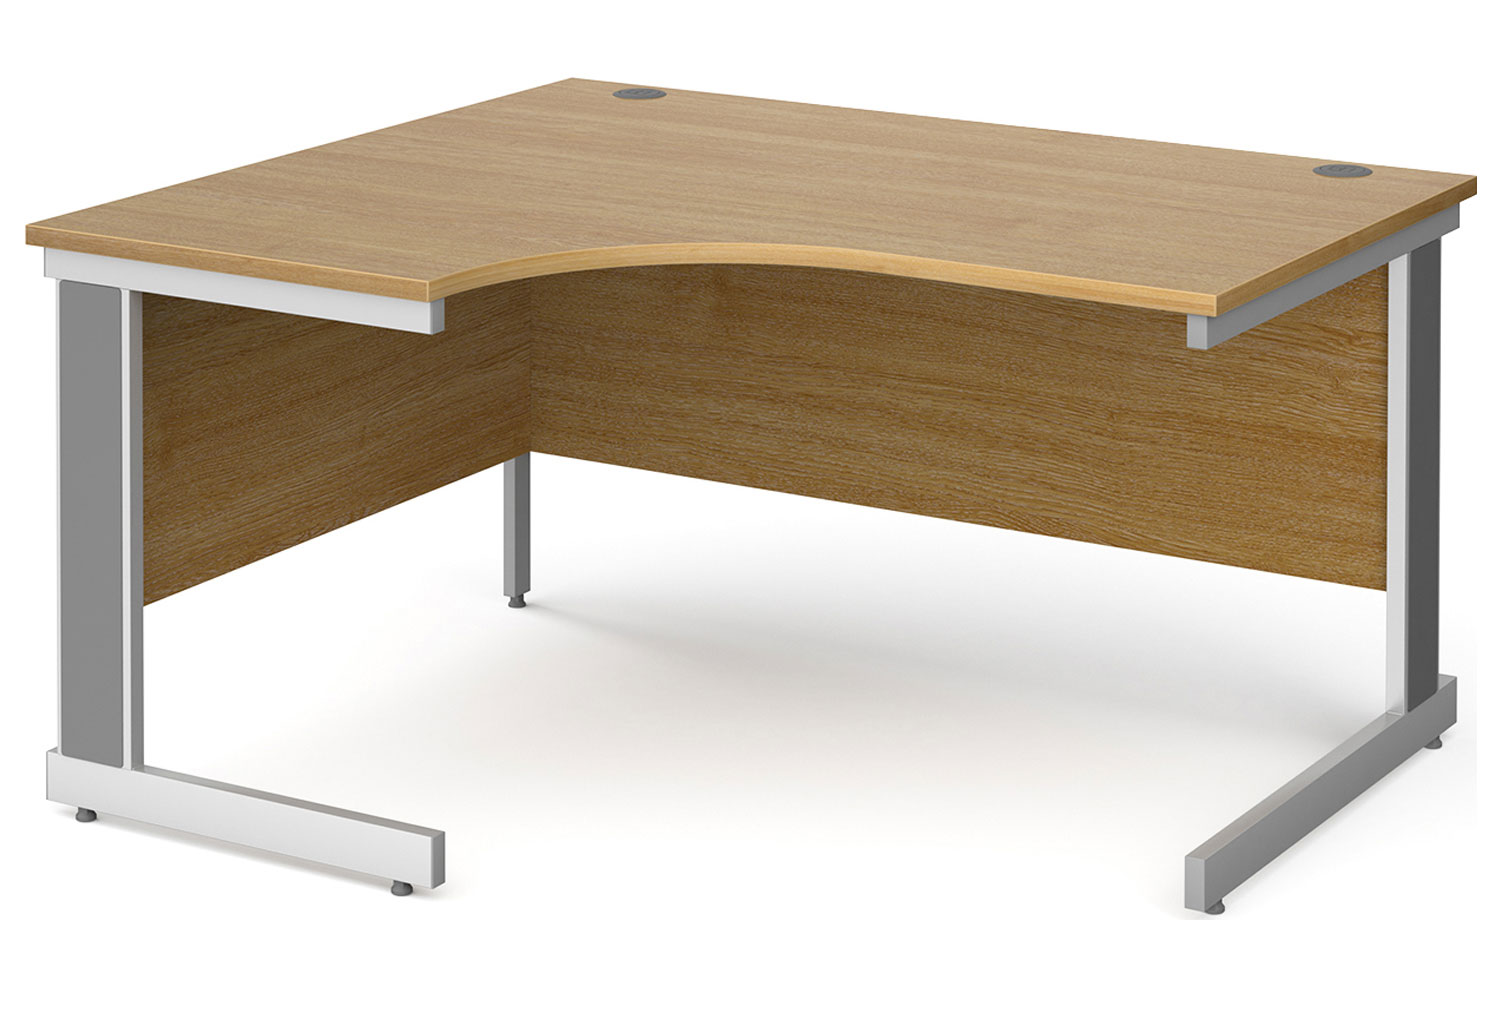 Tully Deluxe Left Hand Ergonomic Office Desk, 140wx120/80dx73h (cm), Oak, Express Delivery